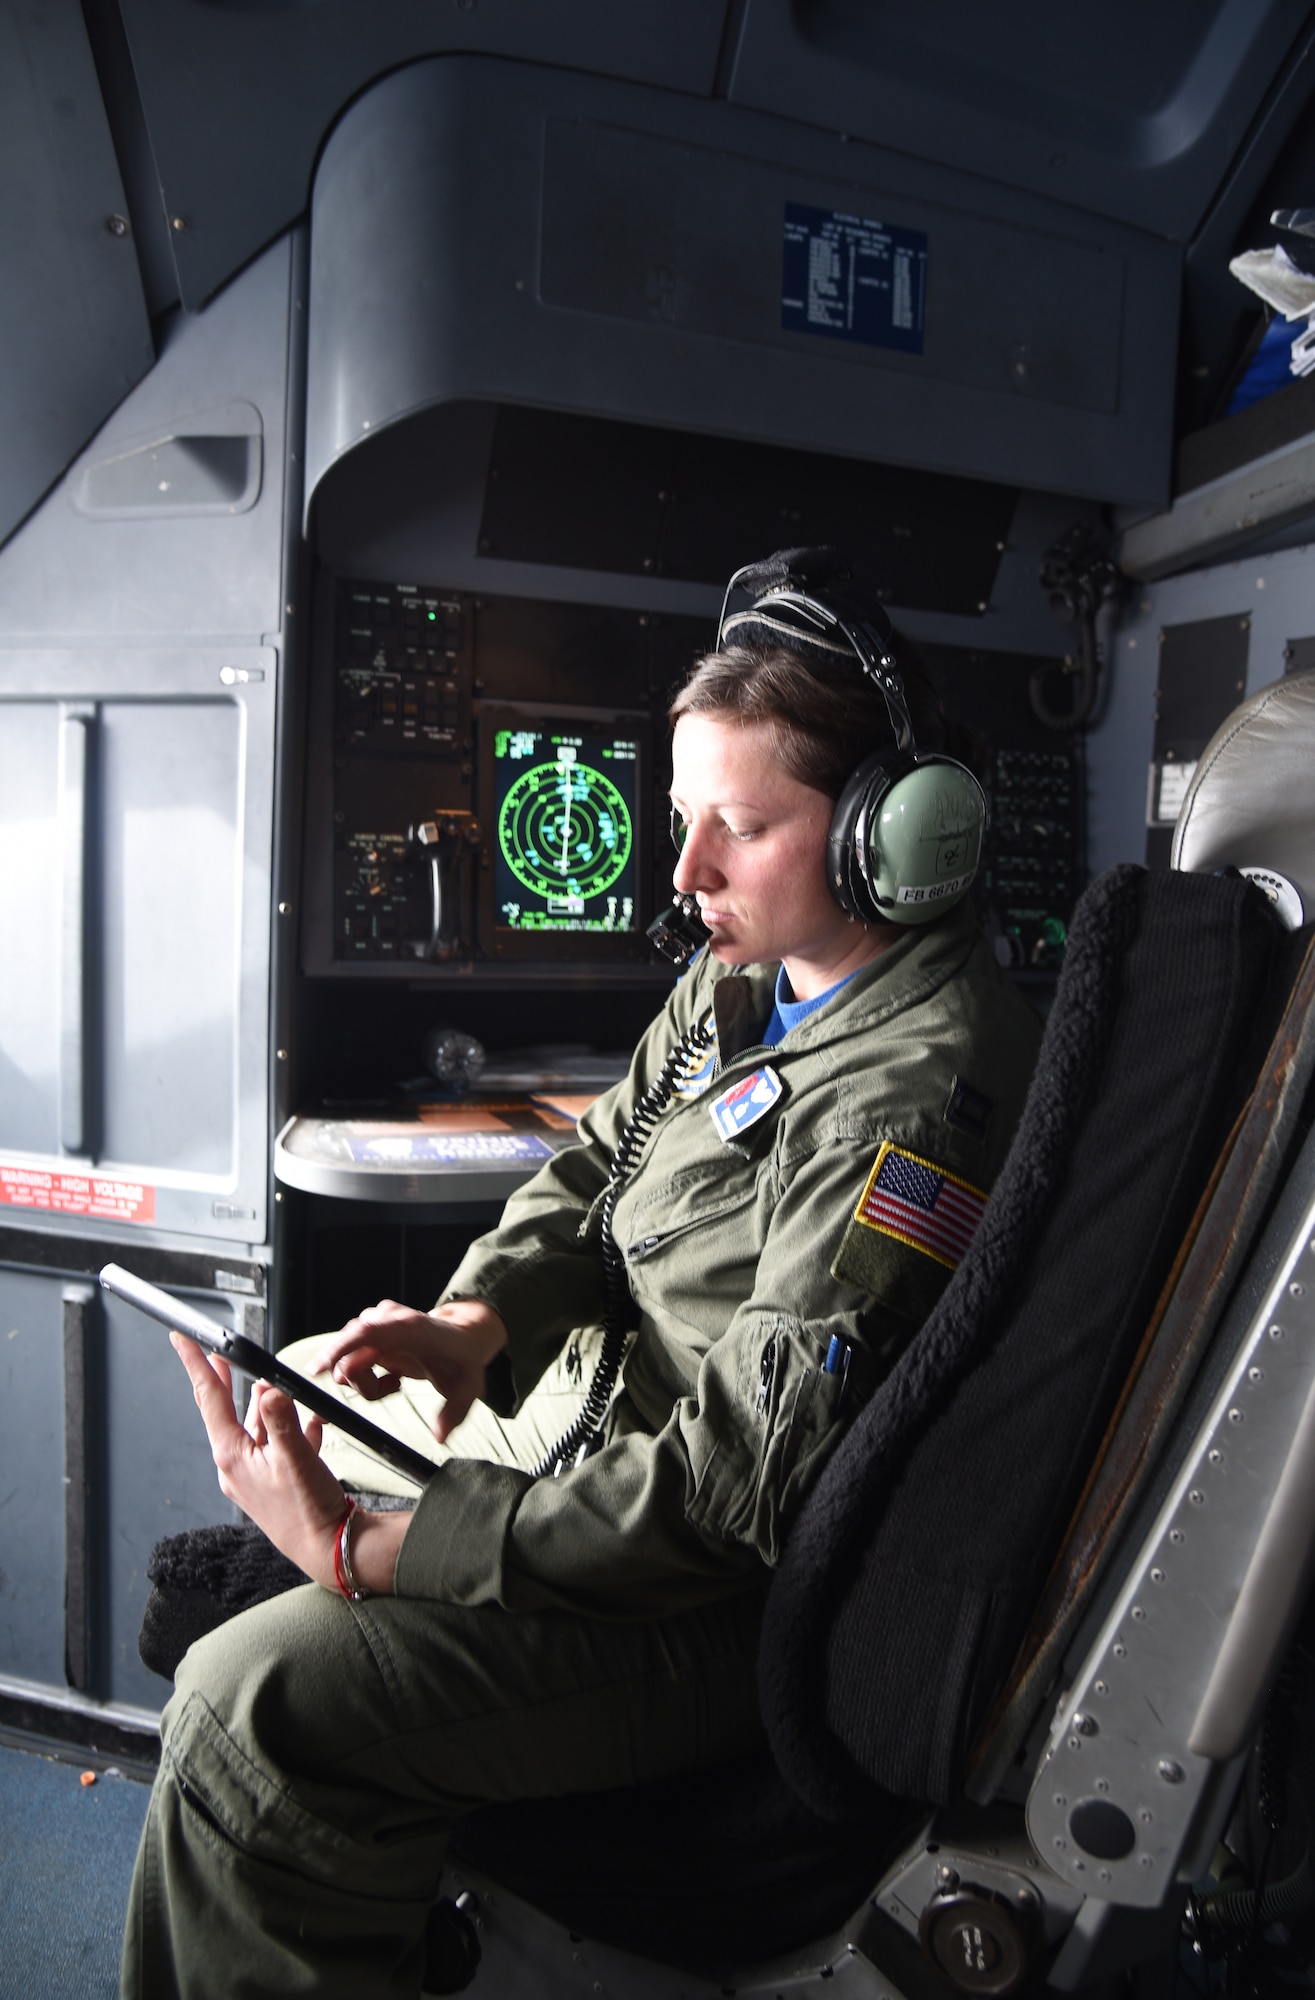 Capt. Julie Fantaske, 53rd Weather Reconnaissance Squadron navigator, checks her inflight publications on her tablet on a flight from Brunswick, Georgia to Keesler Air Force Base, Mississippi, May 10, 2019.  Navigators are responsible for preparing flight plans, which include routes, headings, checkpoints, and times. During flight, they operate from their station using equipment such as GPS, radio, and radar systems that assists in guiding the aircraft through weather. (U.S. Air Force photo by Tech. Sgt. Christopher Carranza)